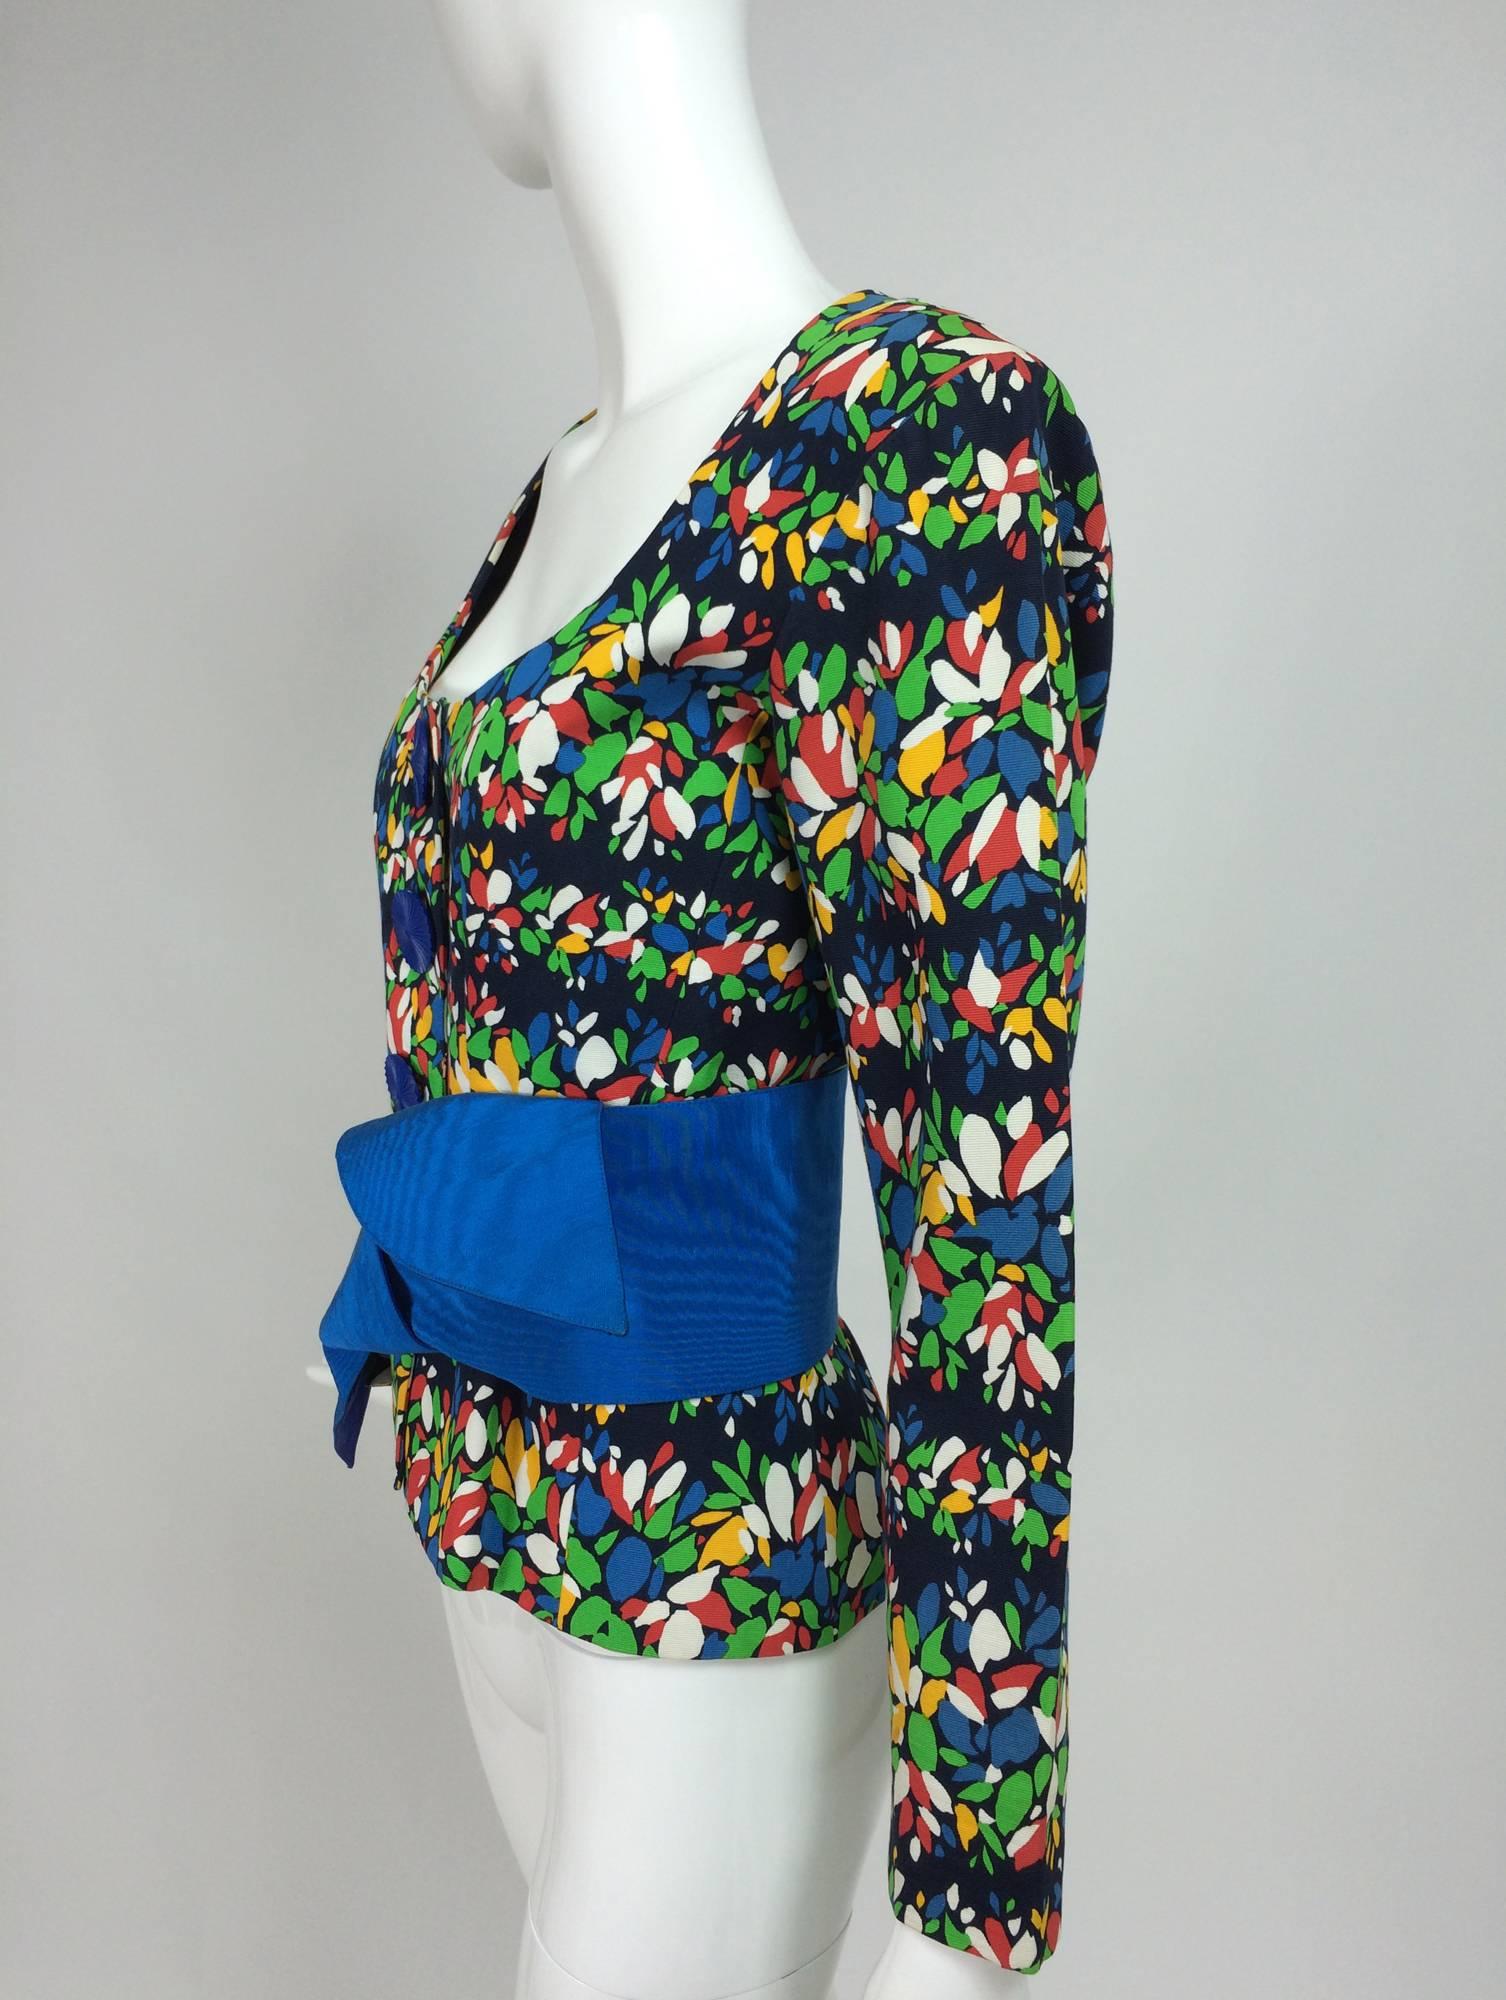 Yves Saint Laurent floral print scoop neck jacket & original belt early 80s...Long sleeve fully lined jacket has low scooped neckline and princess seams at the front...The jacket has the original wide fabric waist wrap in two shades of blue...Closes